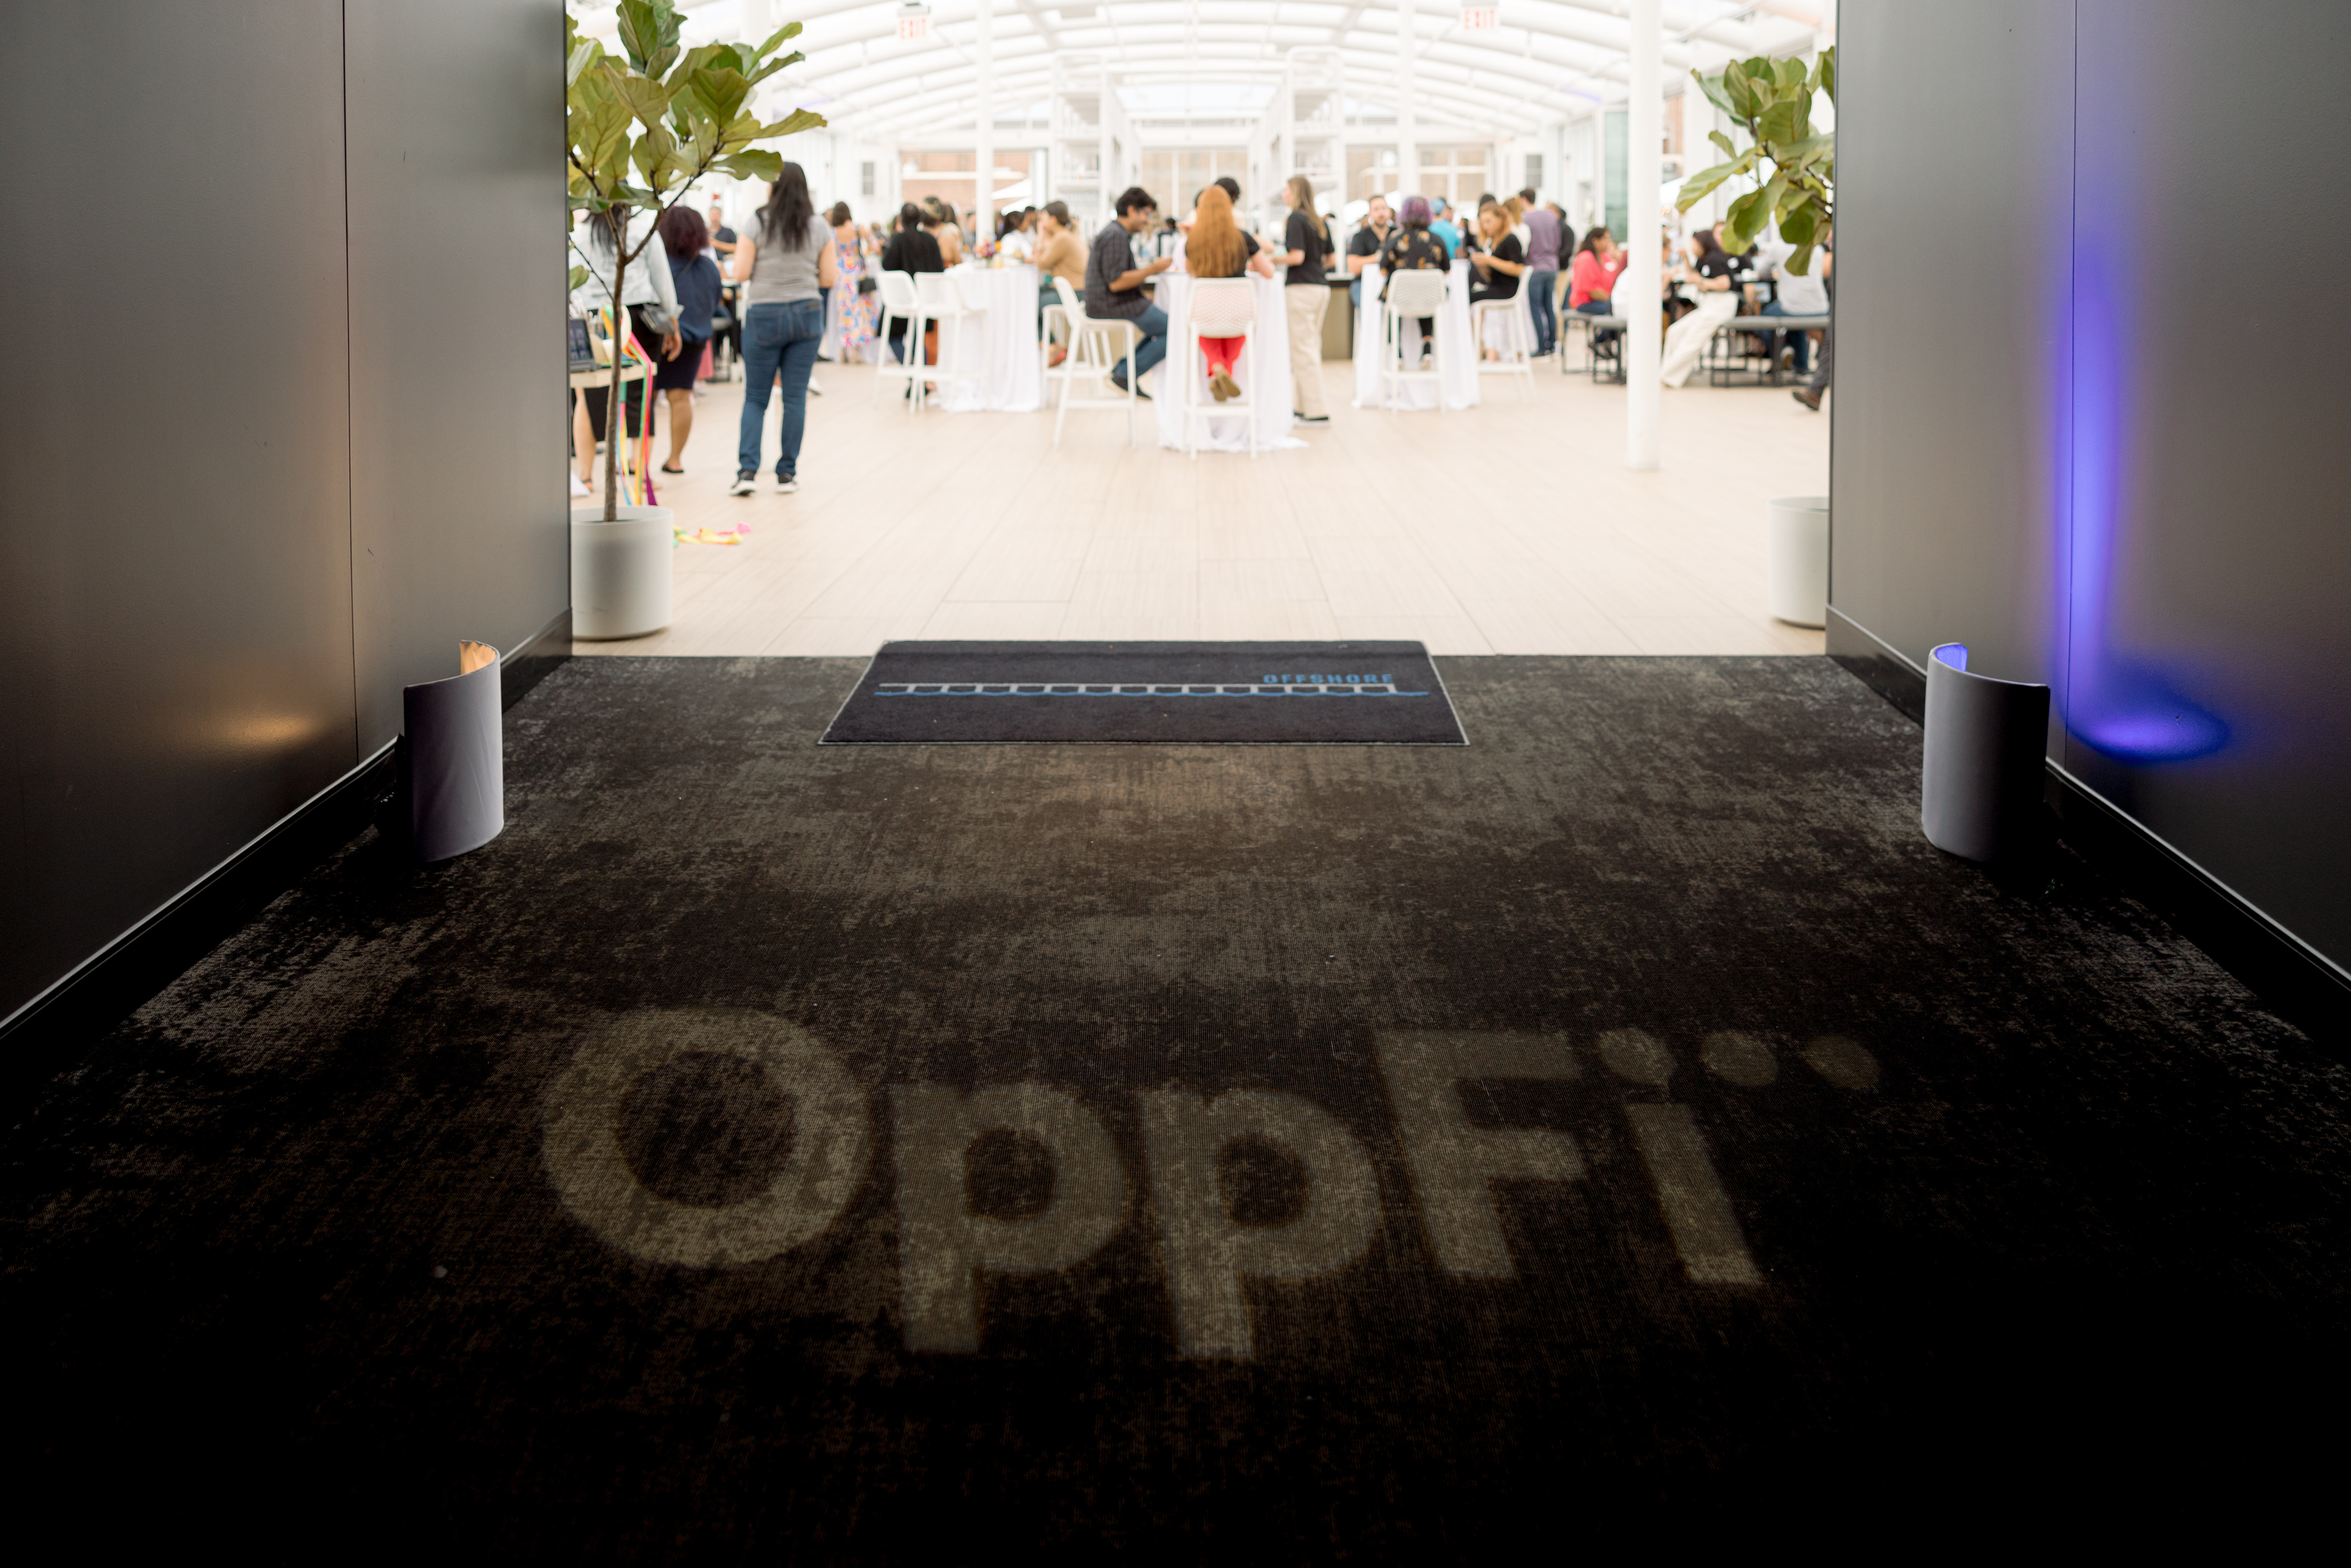 Branded entry lighting reads “OppFi” leading into Thrive Where You Work Week at Navy Pier’s Offshore Rooftop venue.